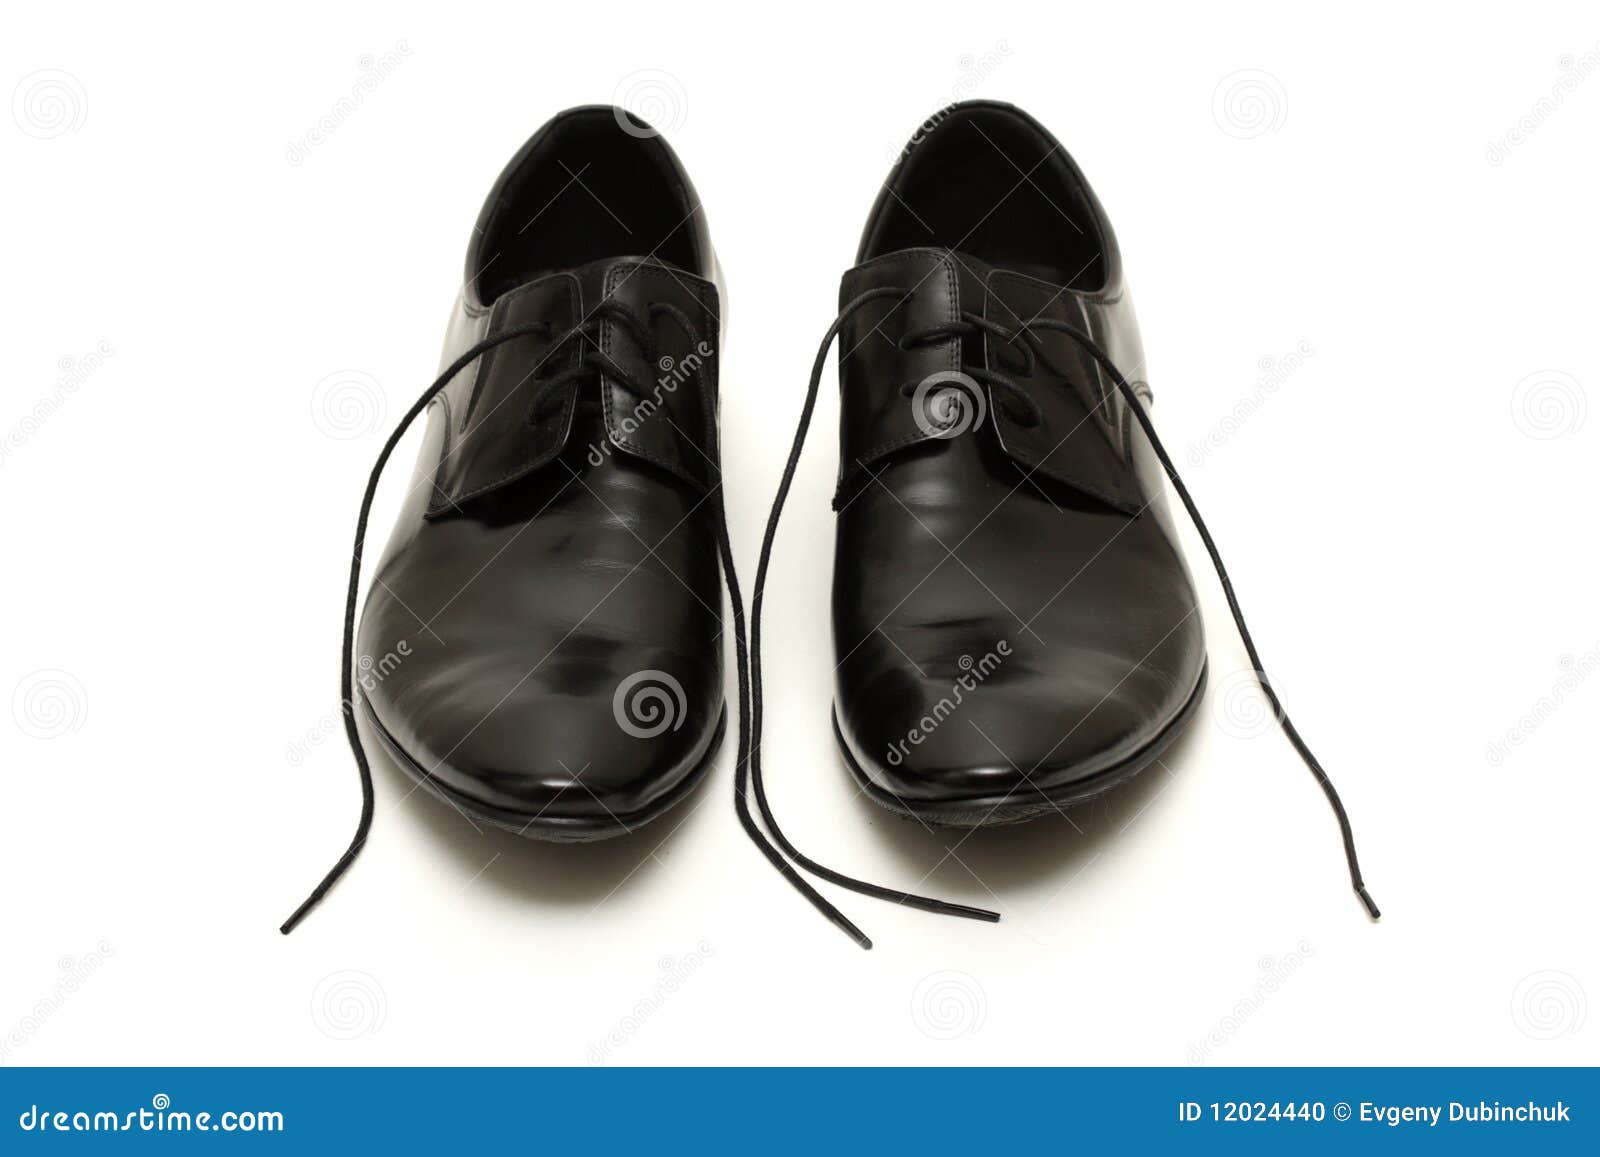 Classic Black Men S Shoes with Untied Laces Stock Photo - Image of lace ...